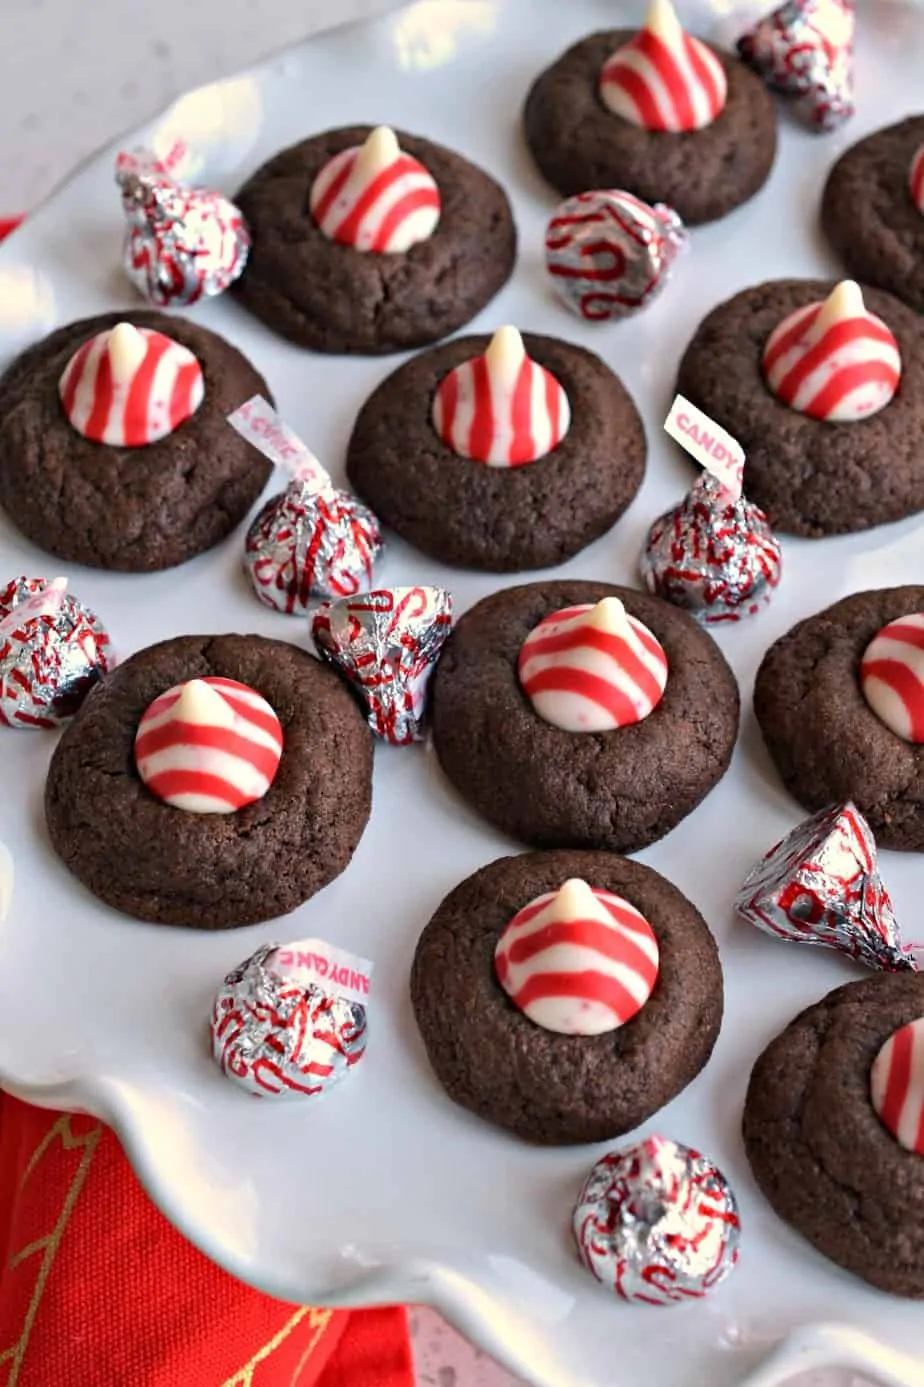 Easy Peppermint Chocolate Thumbprint Cookies are delicious buttery chocolate treats that are topped with a peppermint kiss.